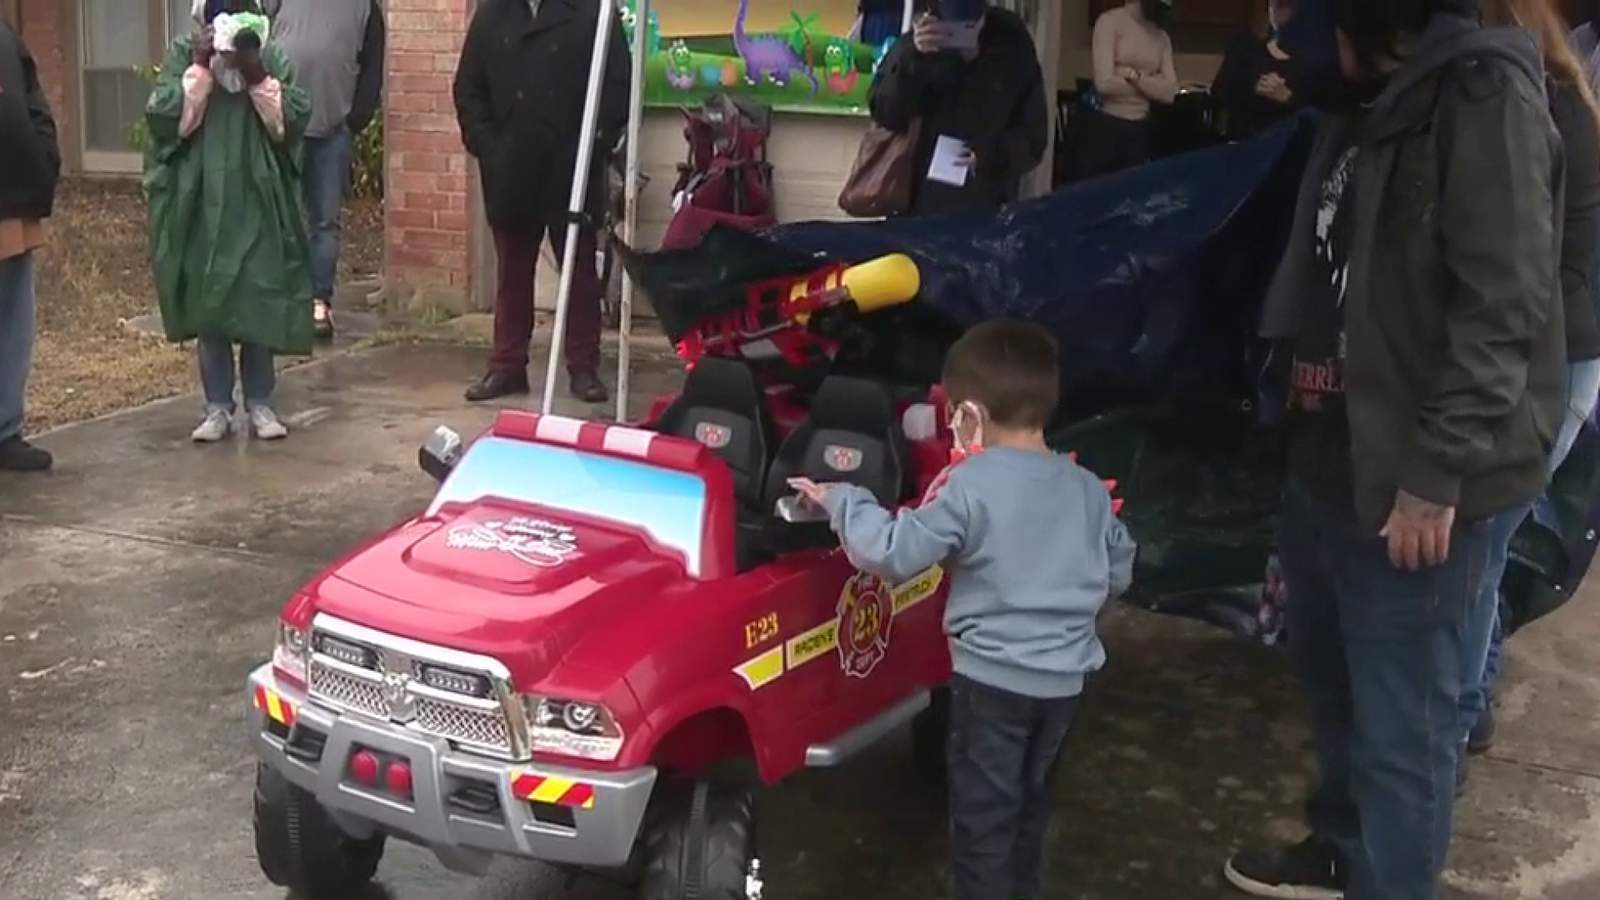 Car parade held for San Antonio boy’s fifth birthday after losing both parents to COVID-19